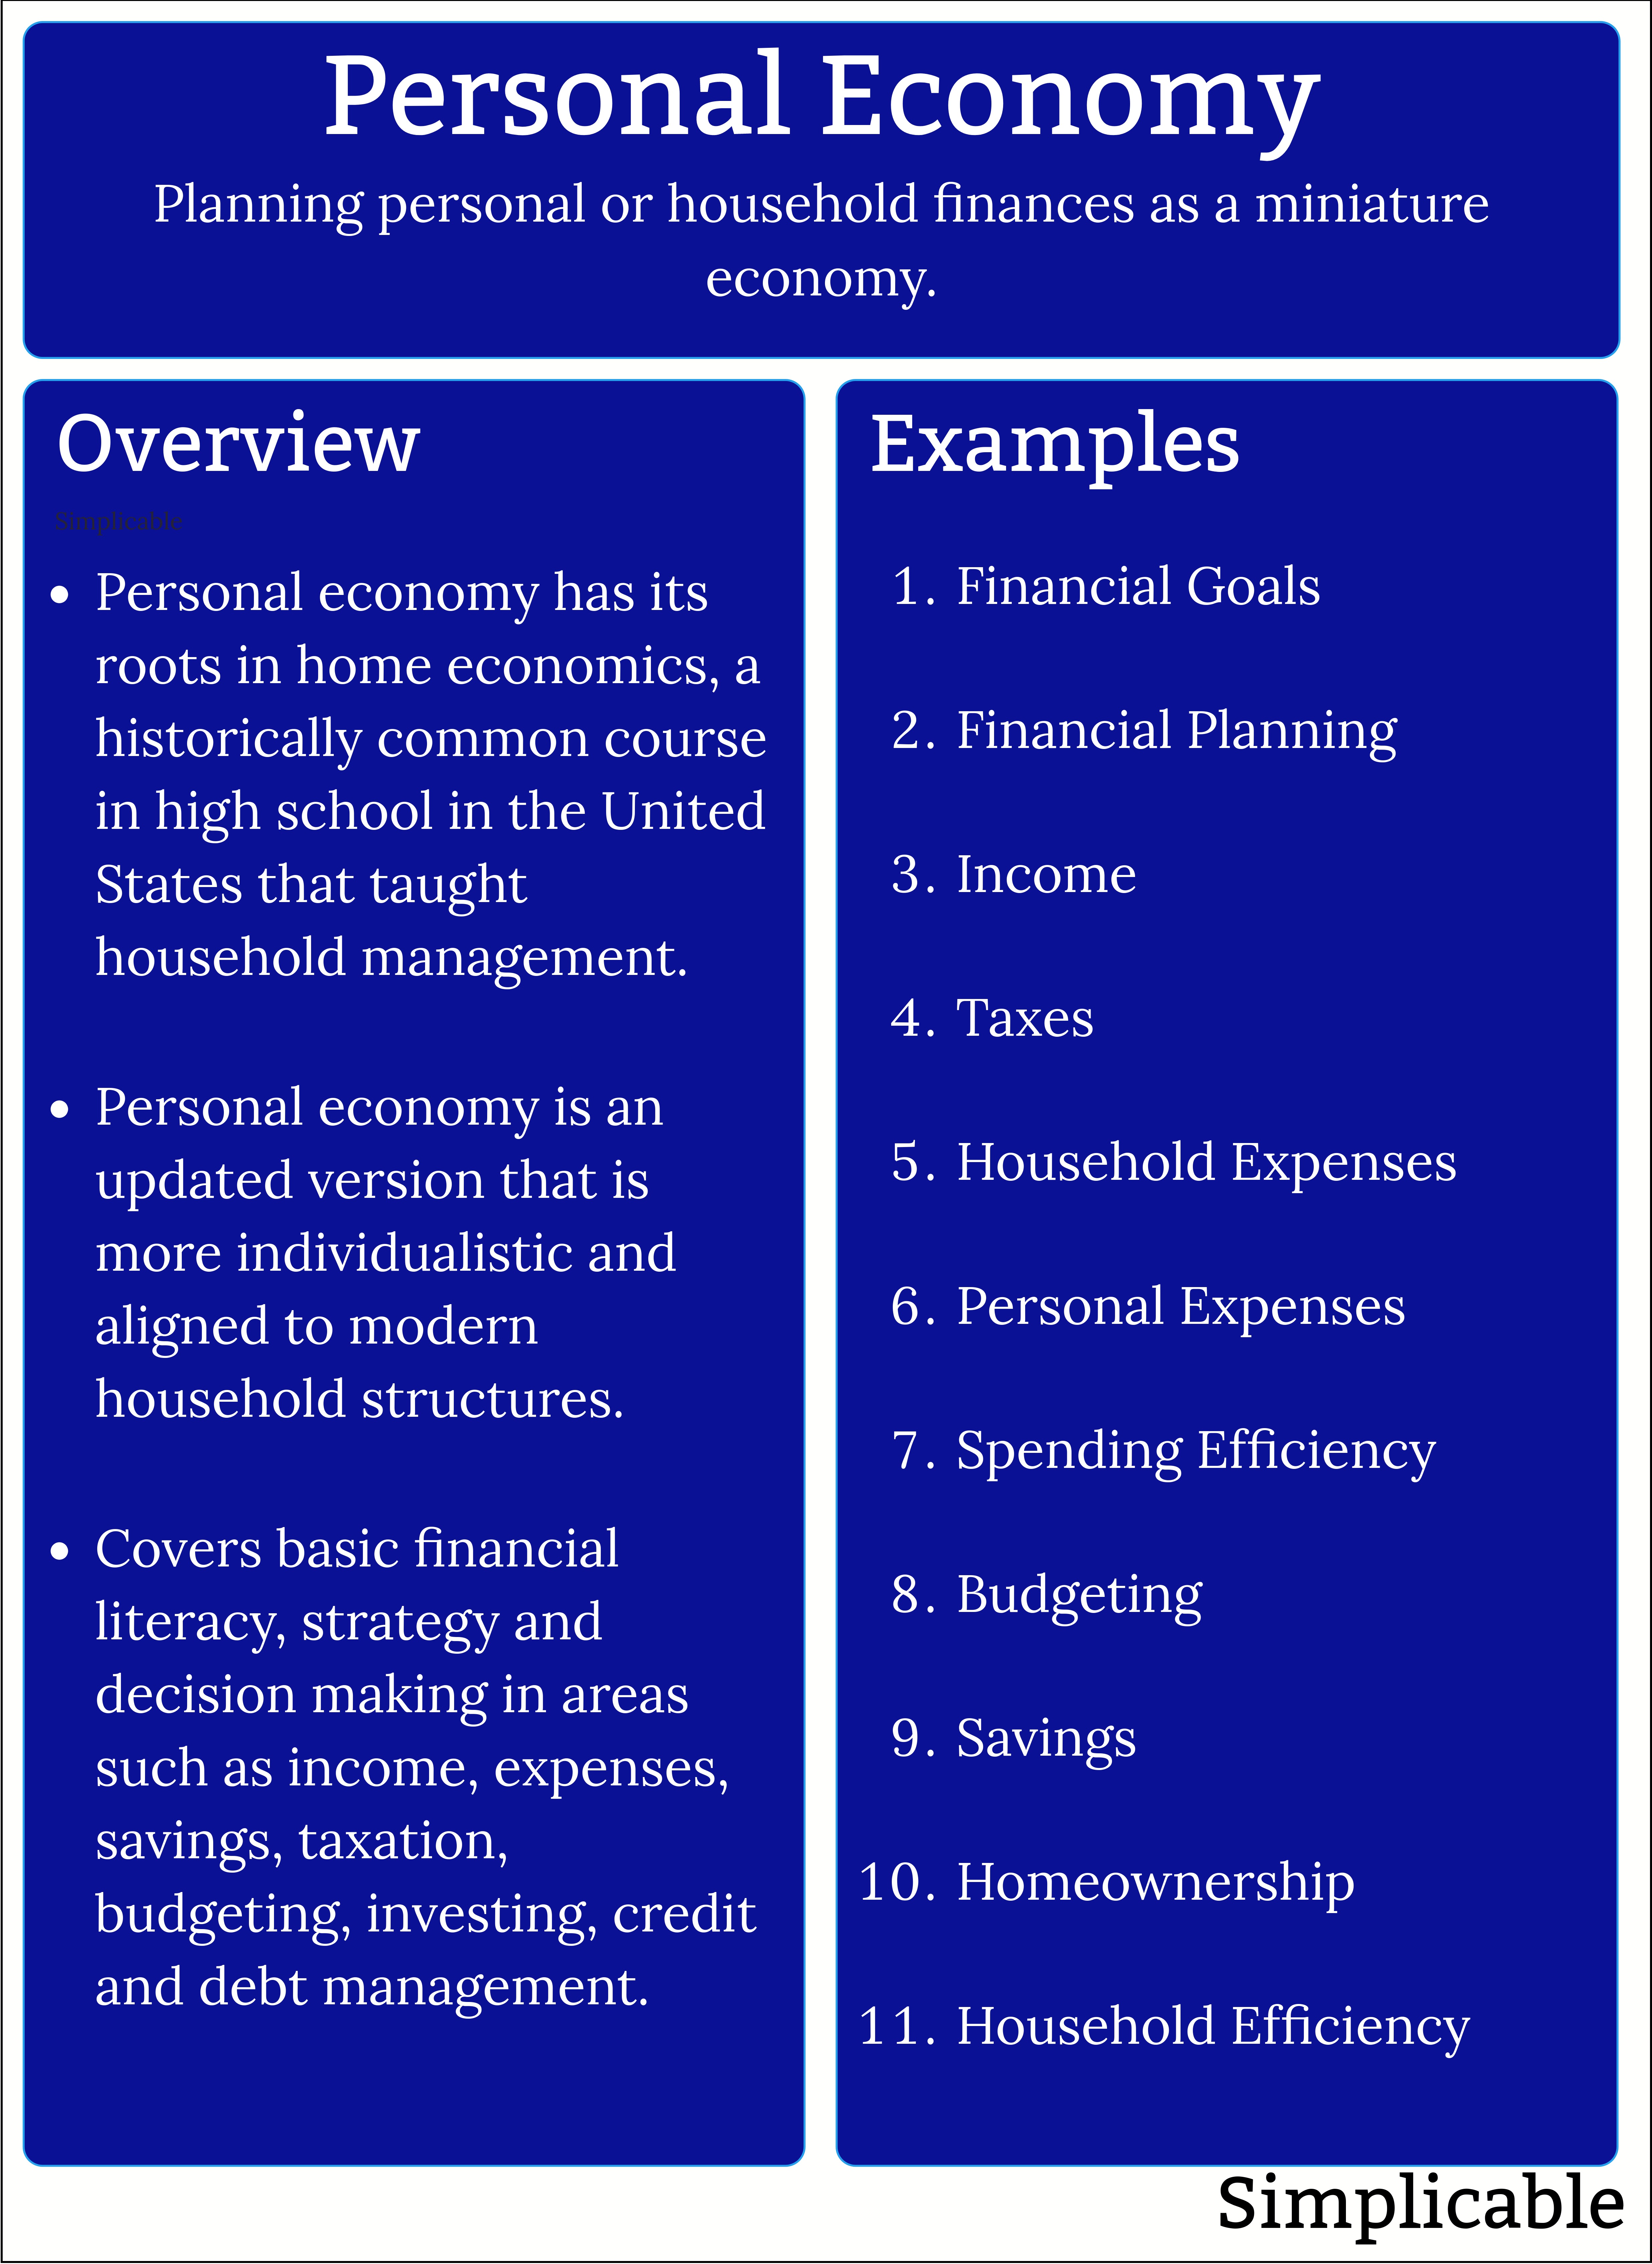 personal economy overview and examples